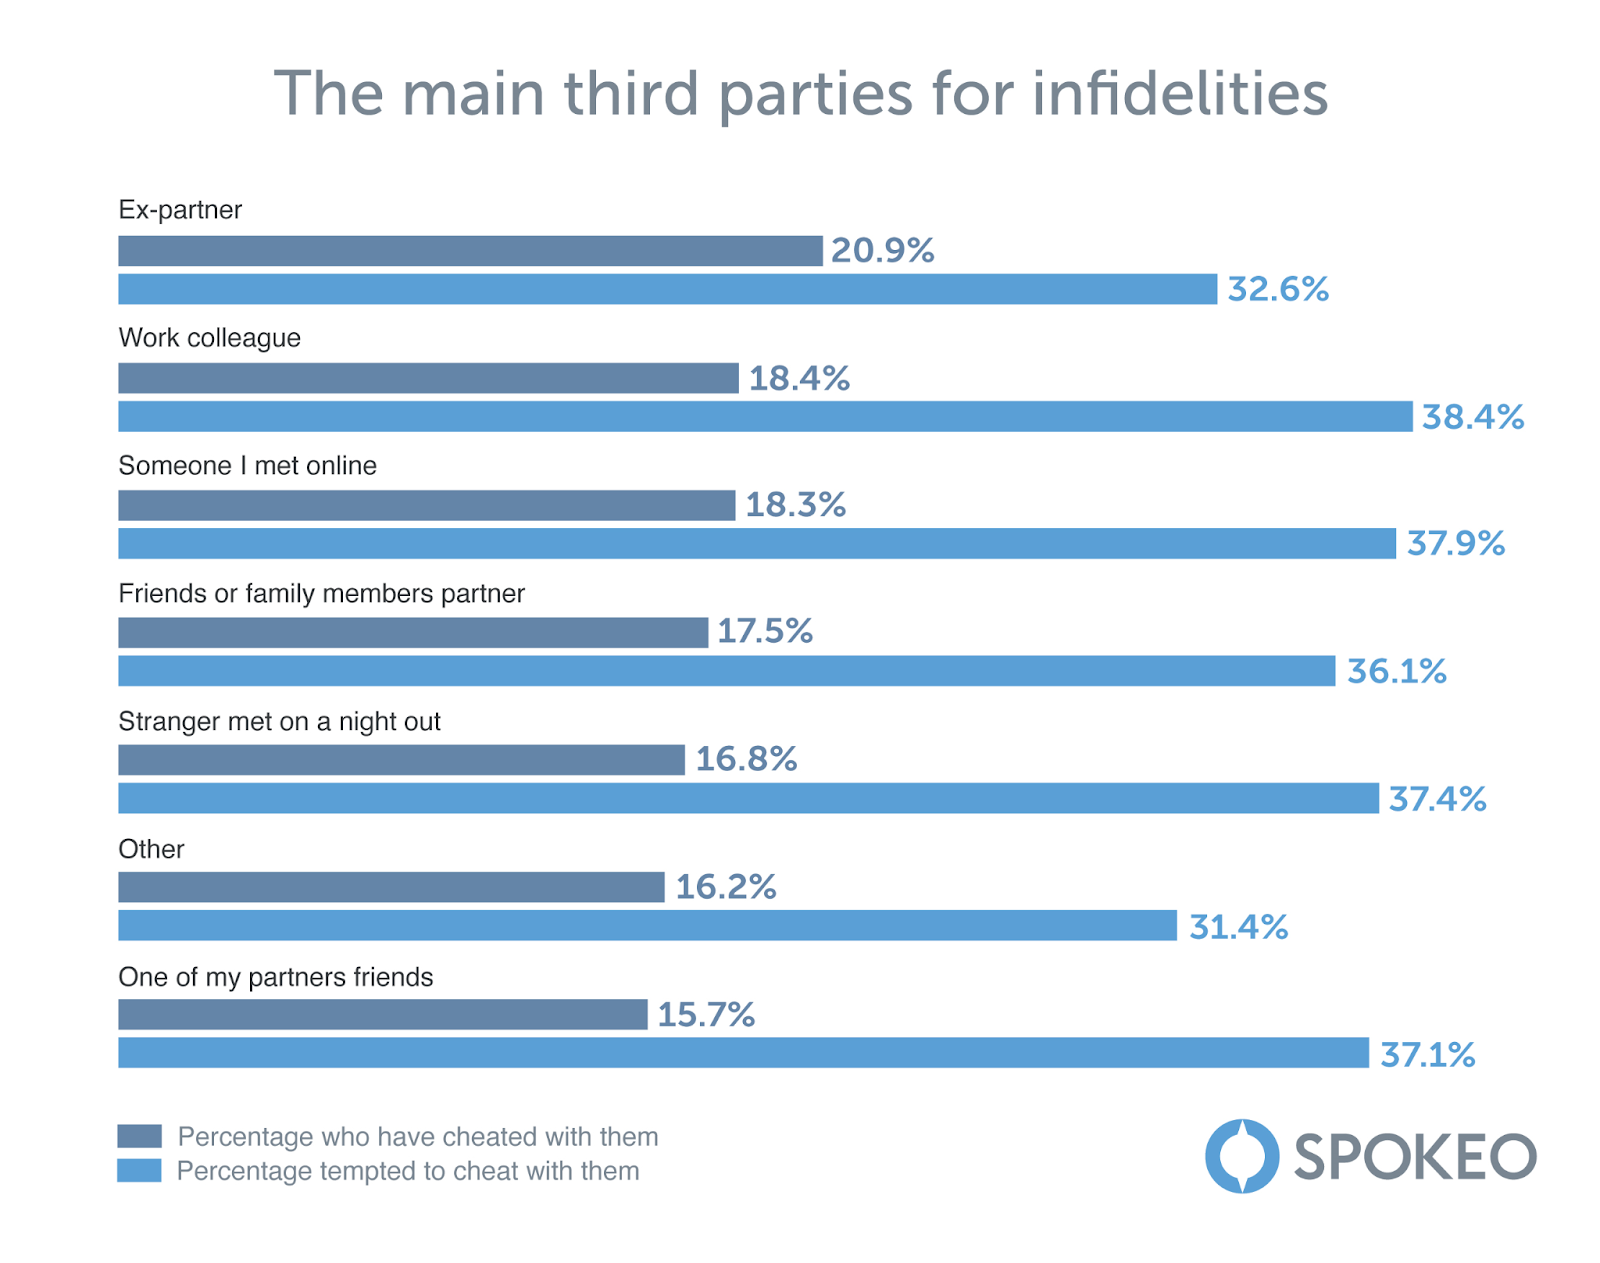 A graph chart showing results to the main third parties for infidelities.